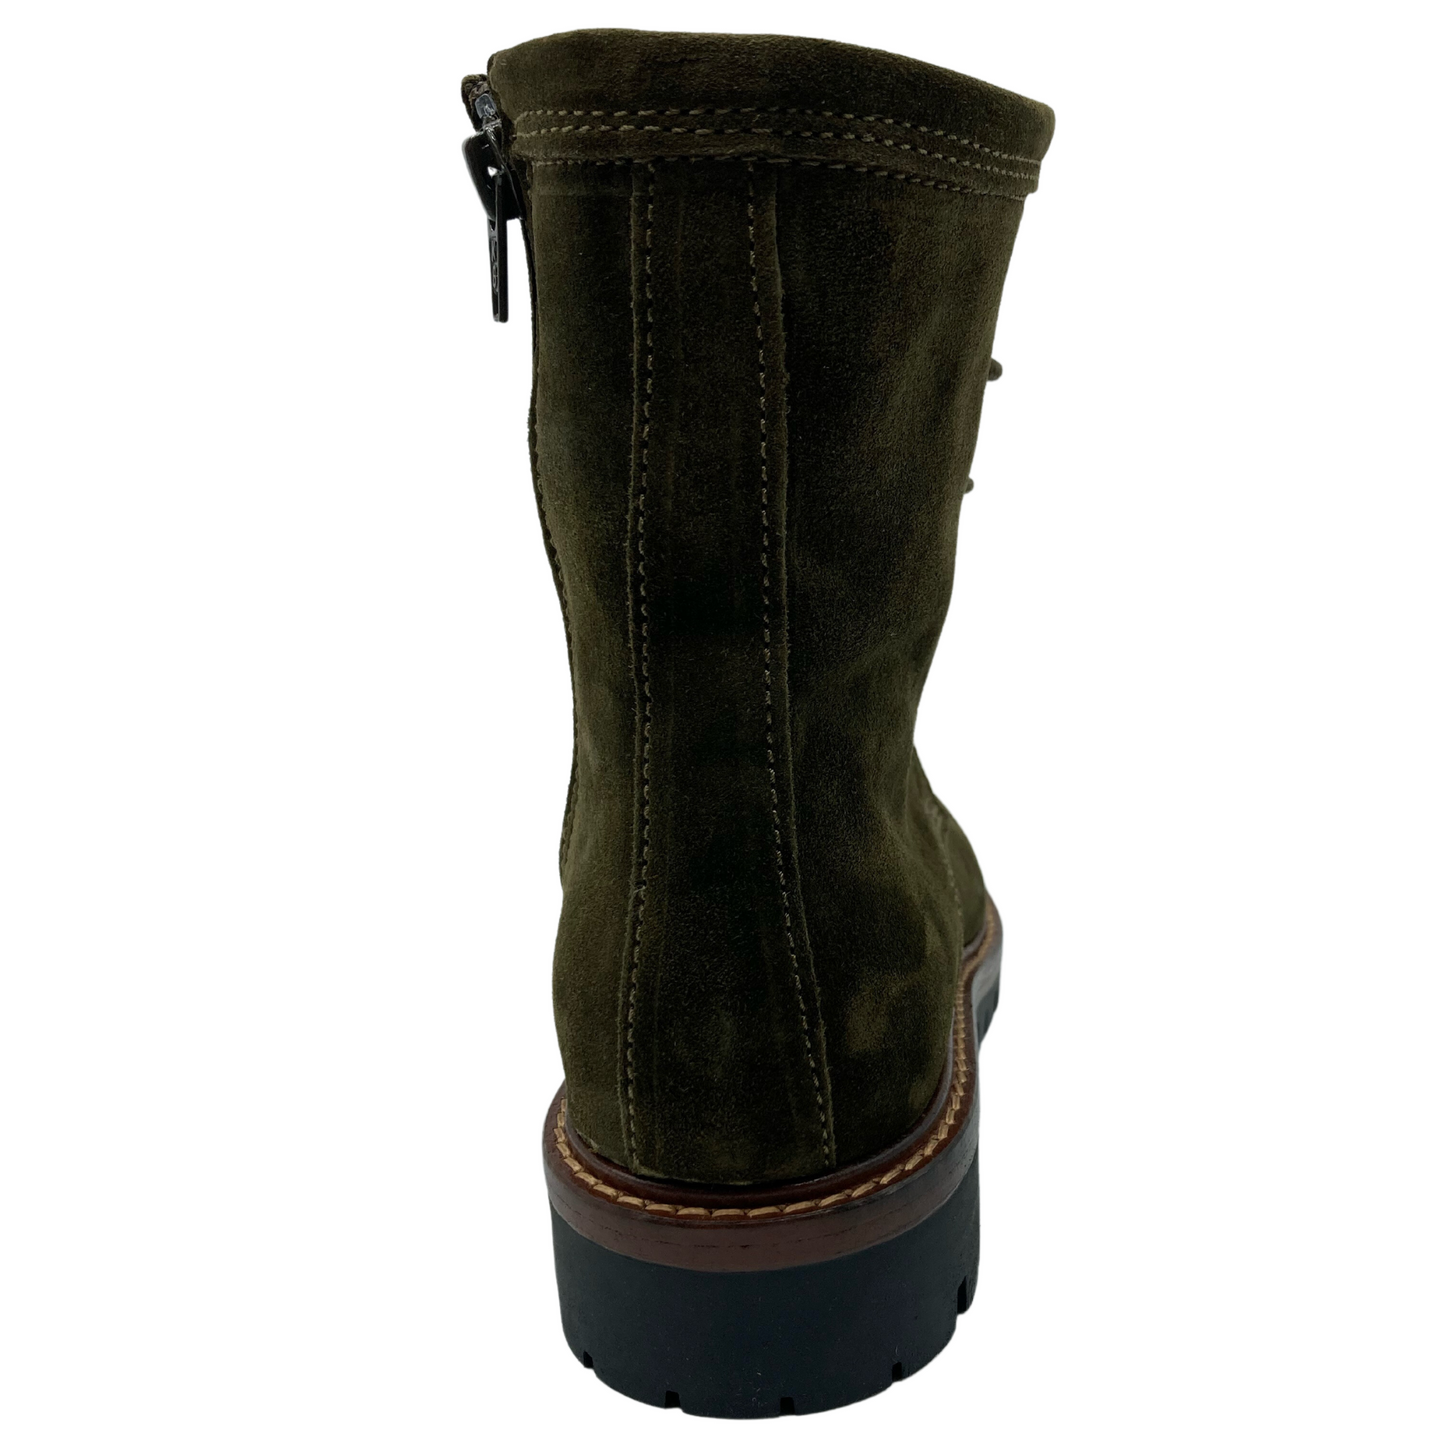 Back view of khaki green short boot with side zipper closure and black and brown rubber sole